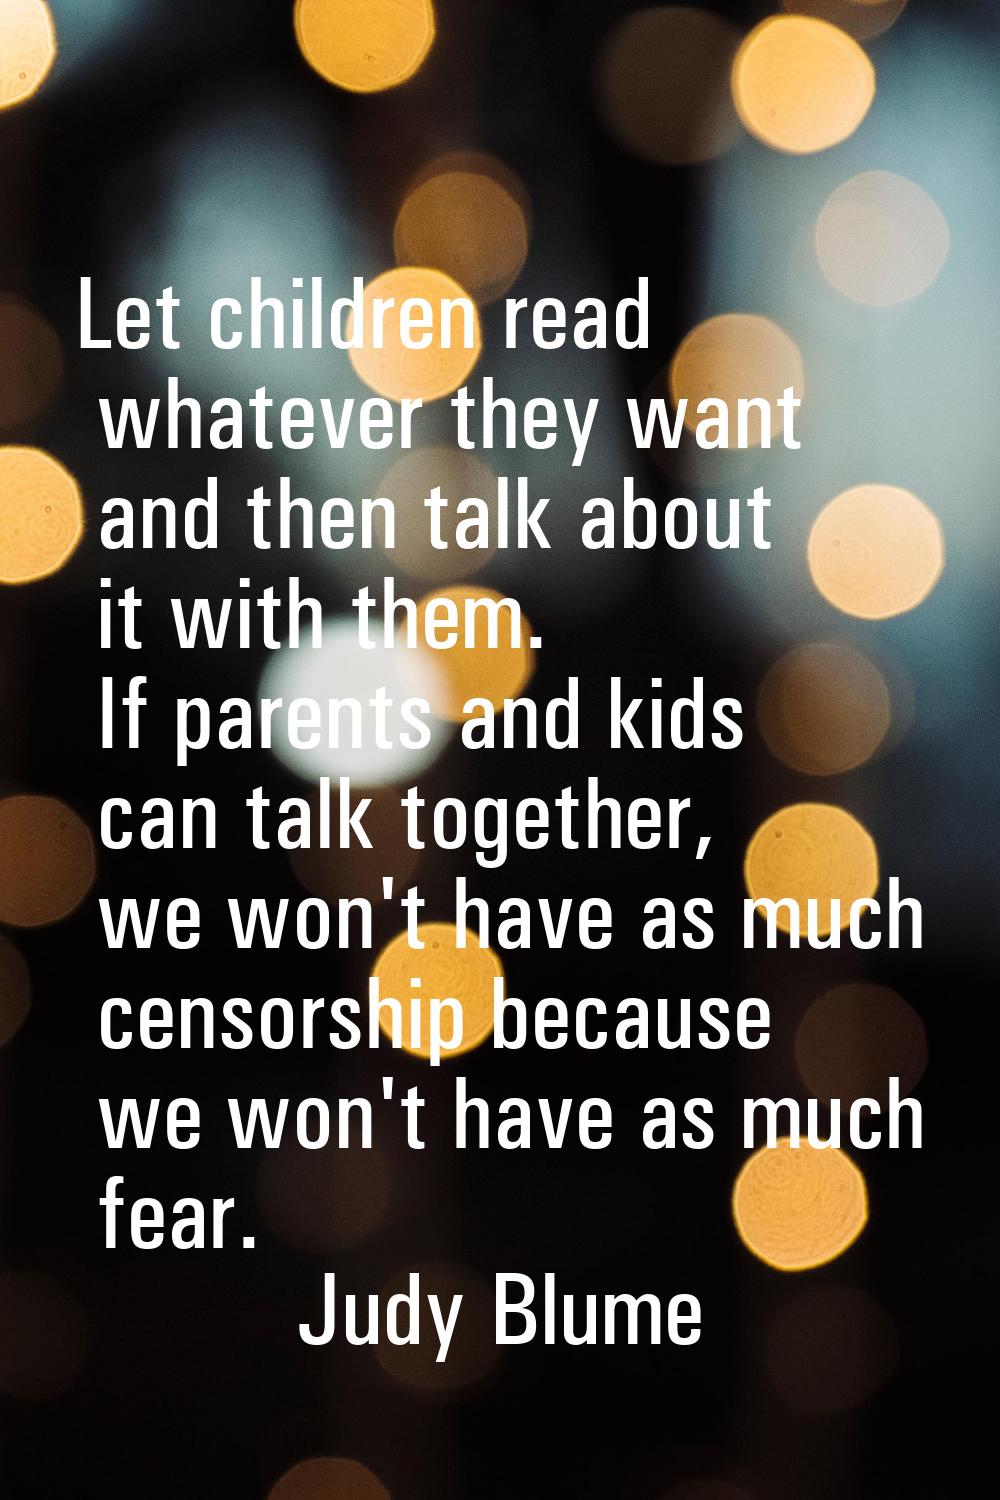 Let children read whatever they want and then talk about it with them. If parents and kids can talk